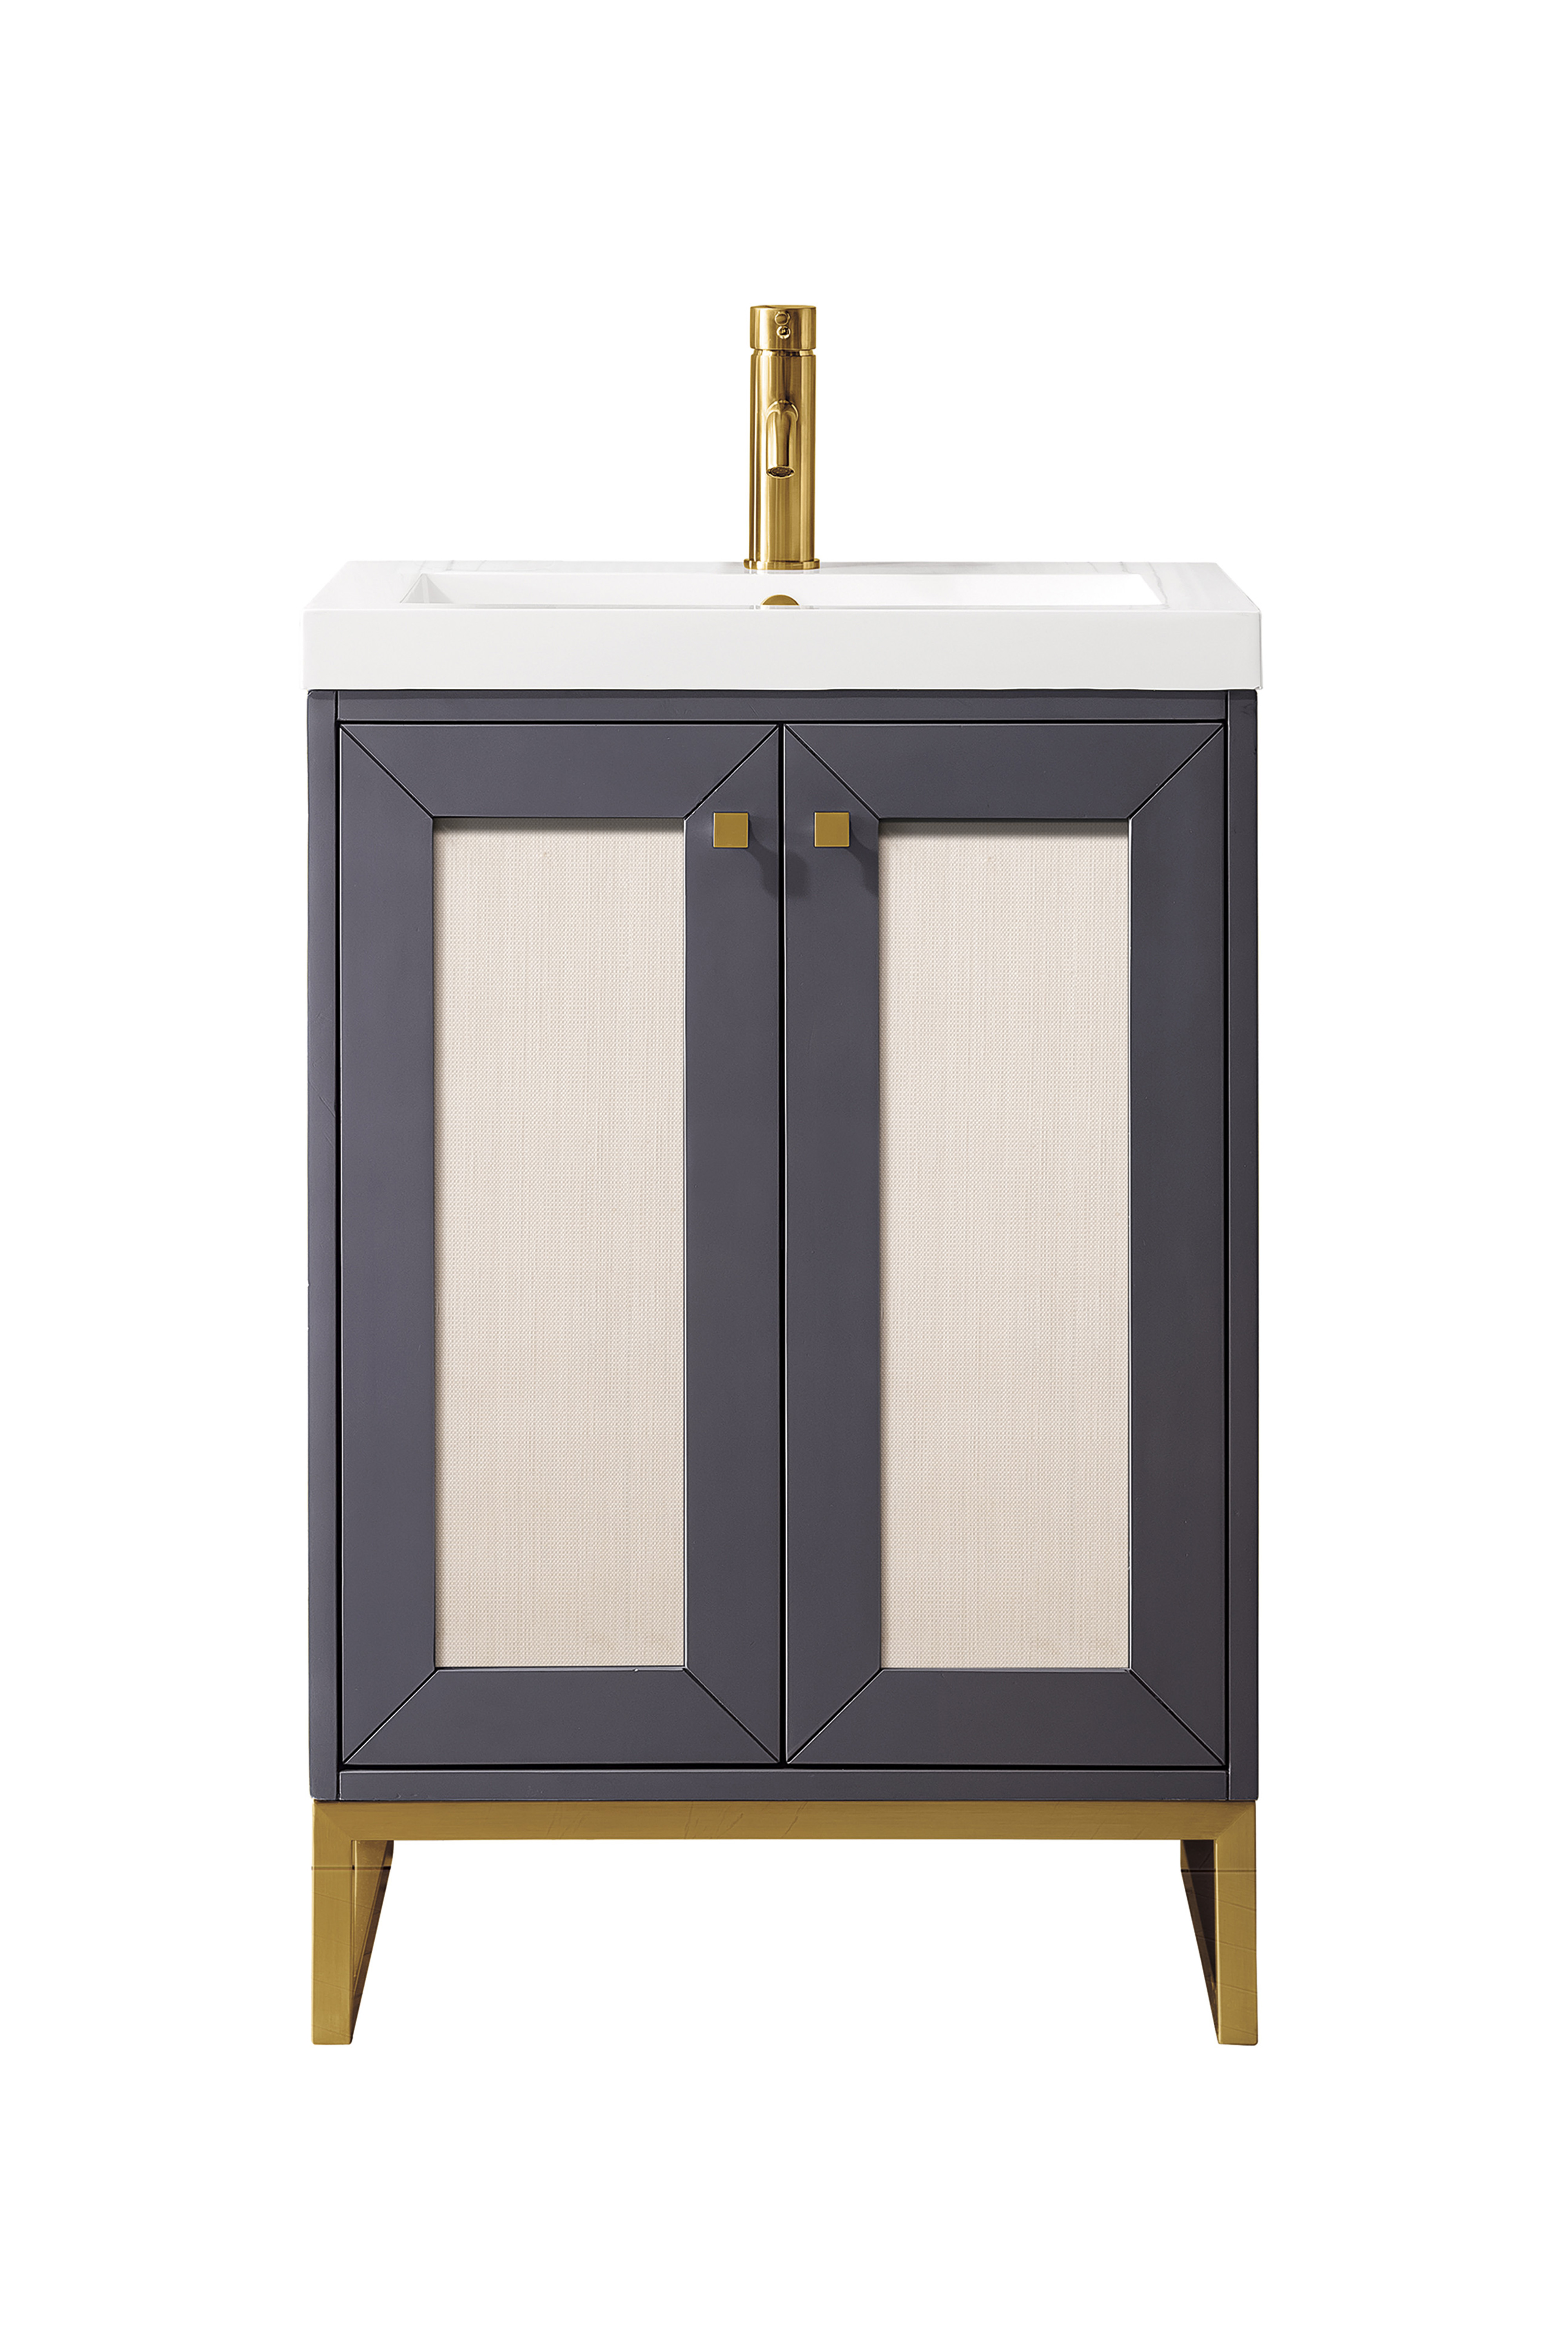 James Martin E303V24MGRGDWG Chianti 24" Single Vanity Cabinet, Mineral Grey, Radiant Gold, w/ White Glossy Composite Countertop